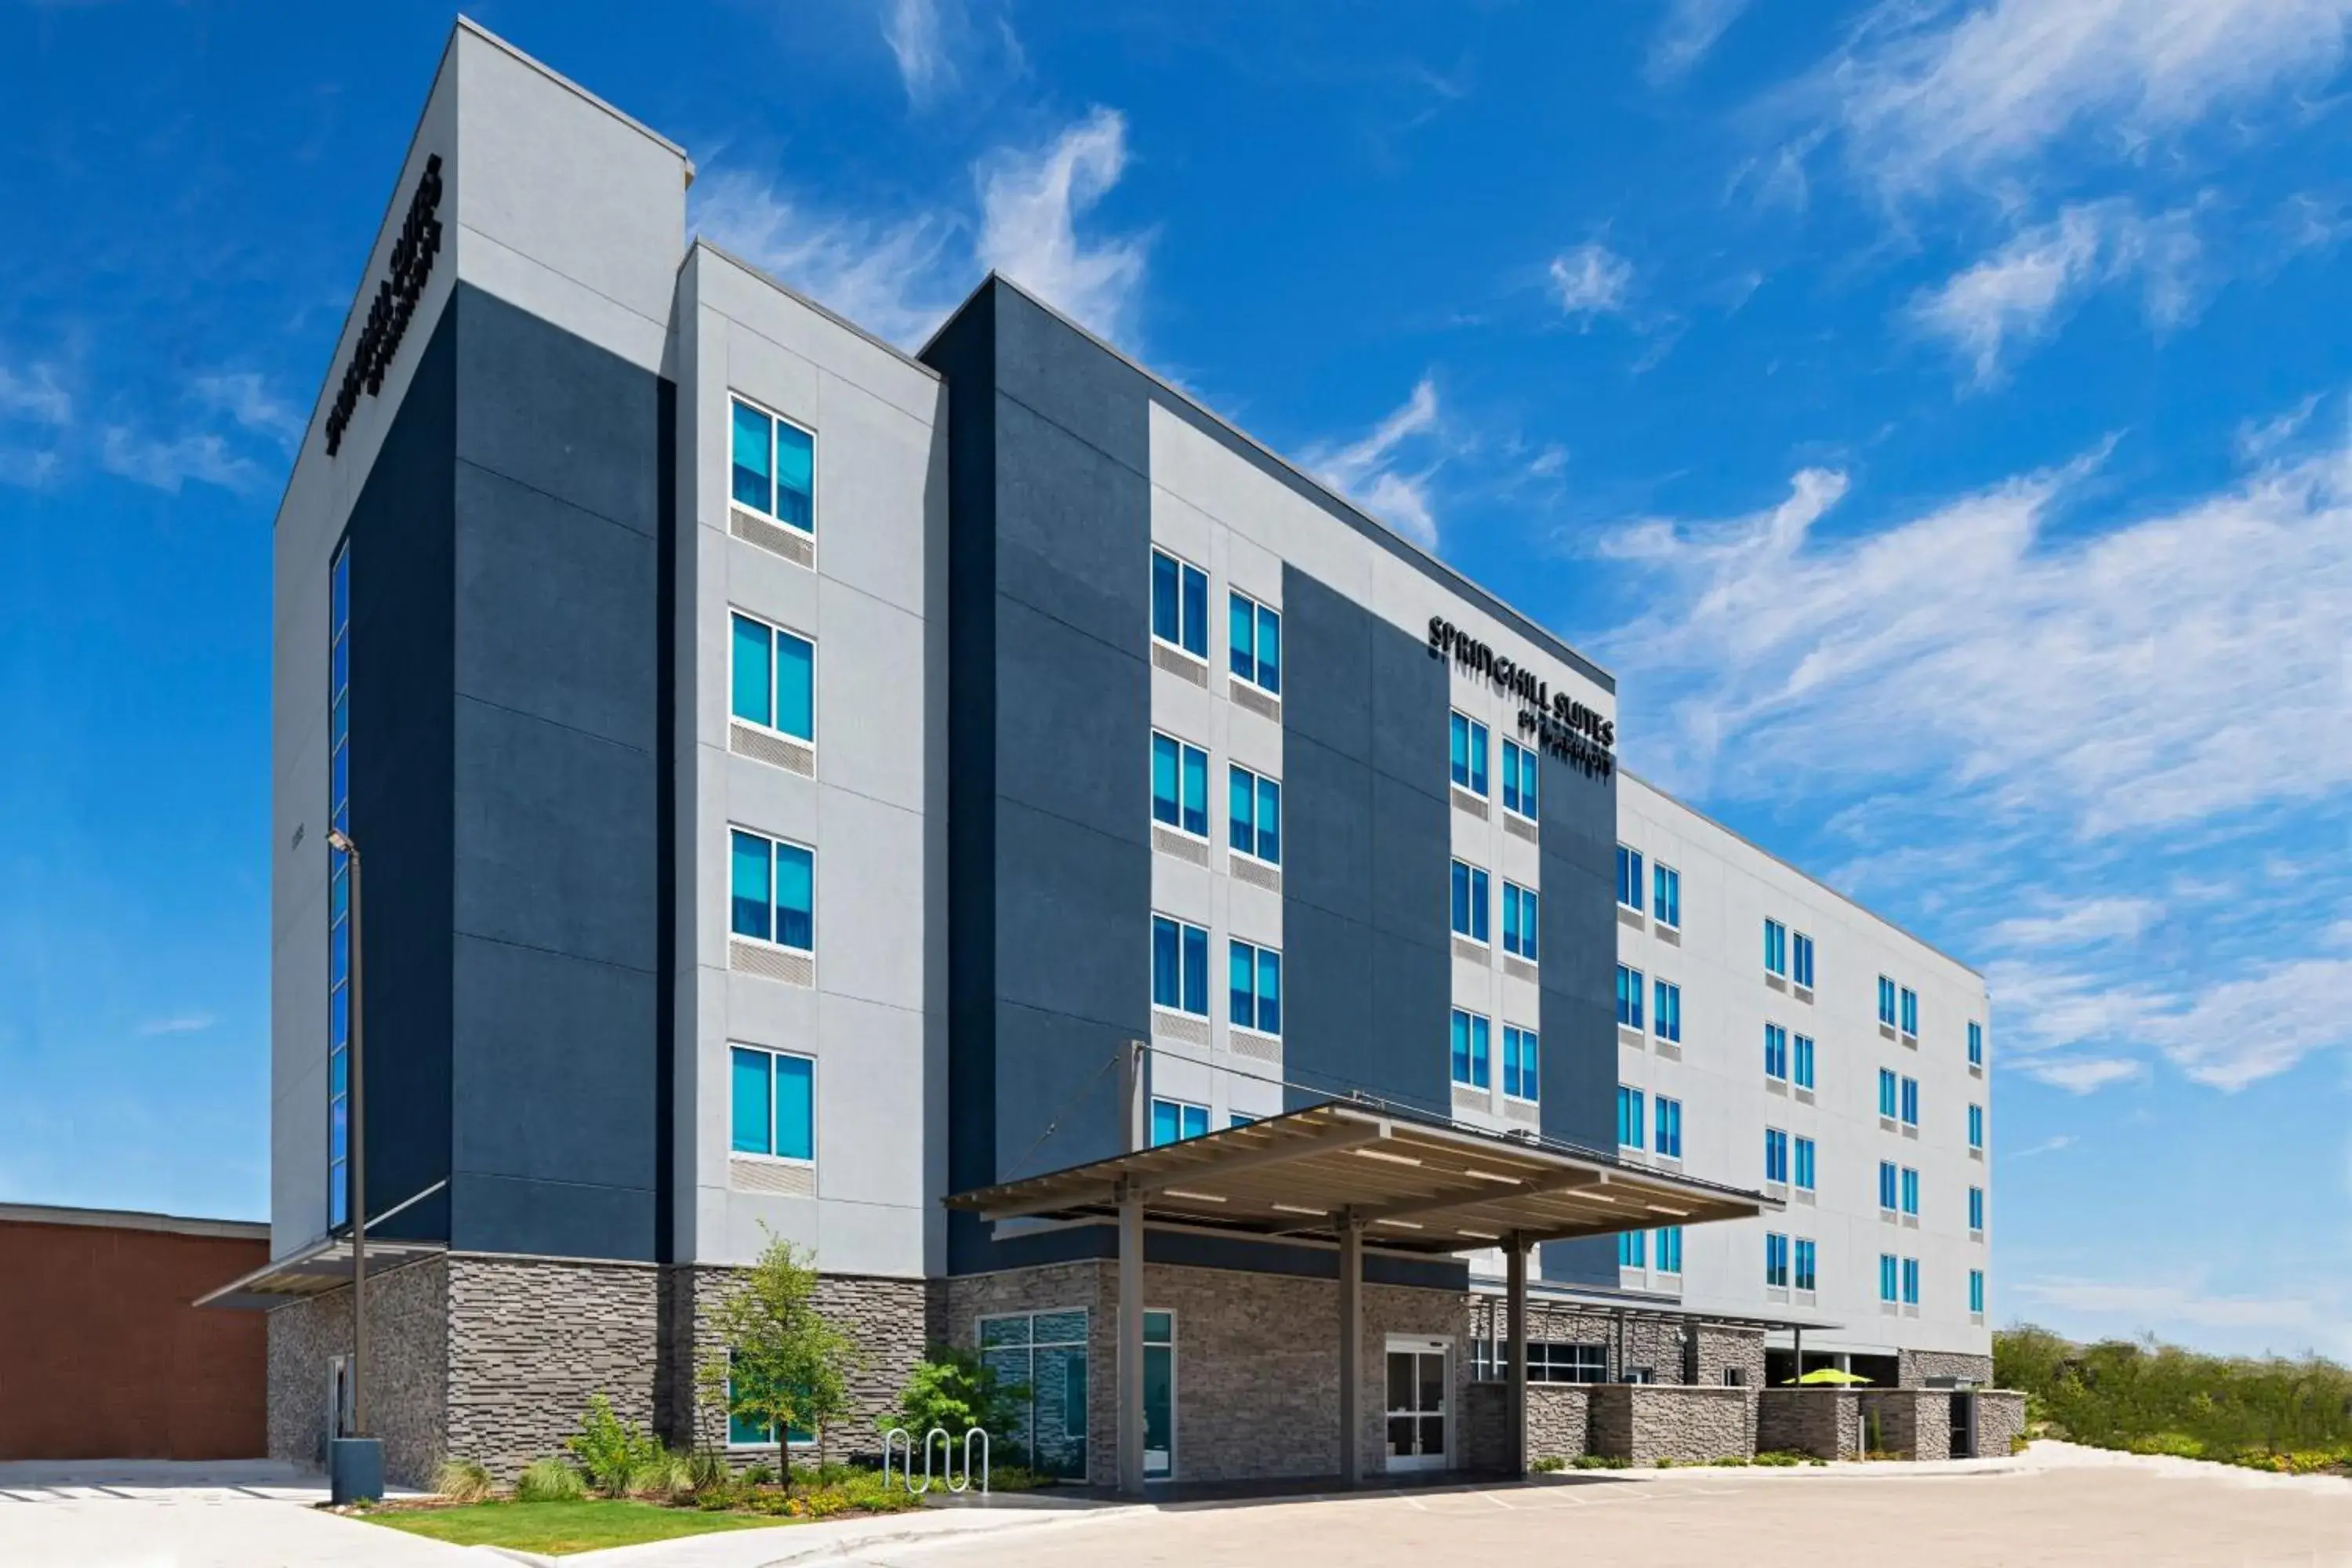 Property Building in SpringHill Suites by Marriott Austin Northwest Research Blvd